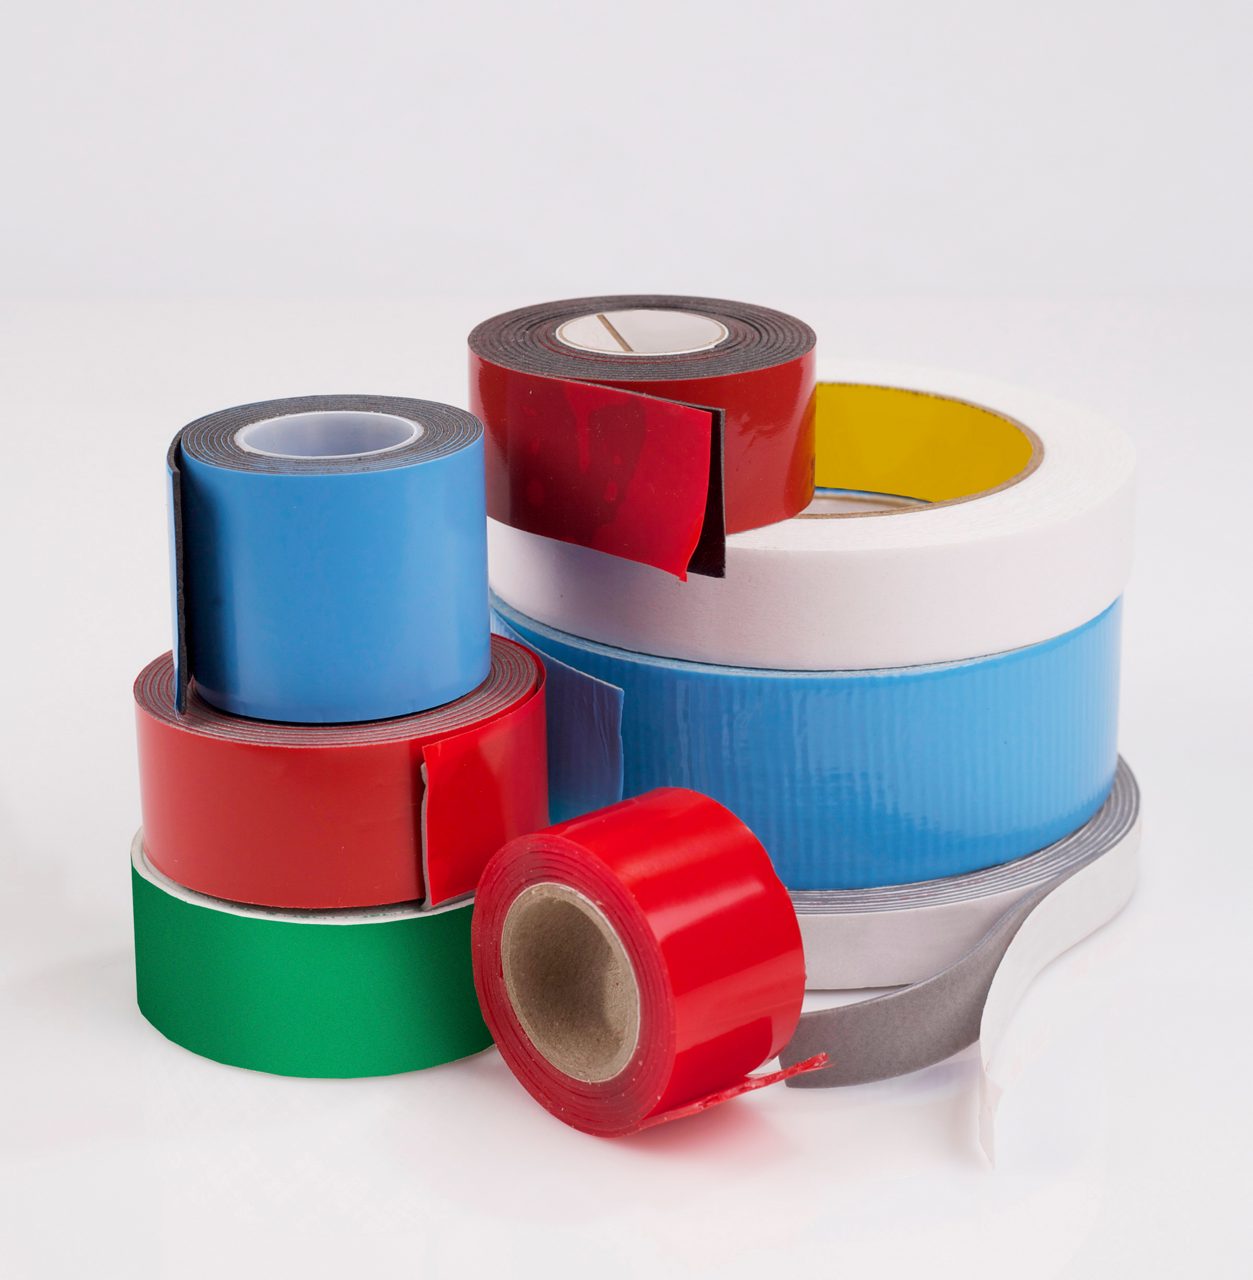 Various rolls of tape on a white background